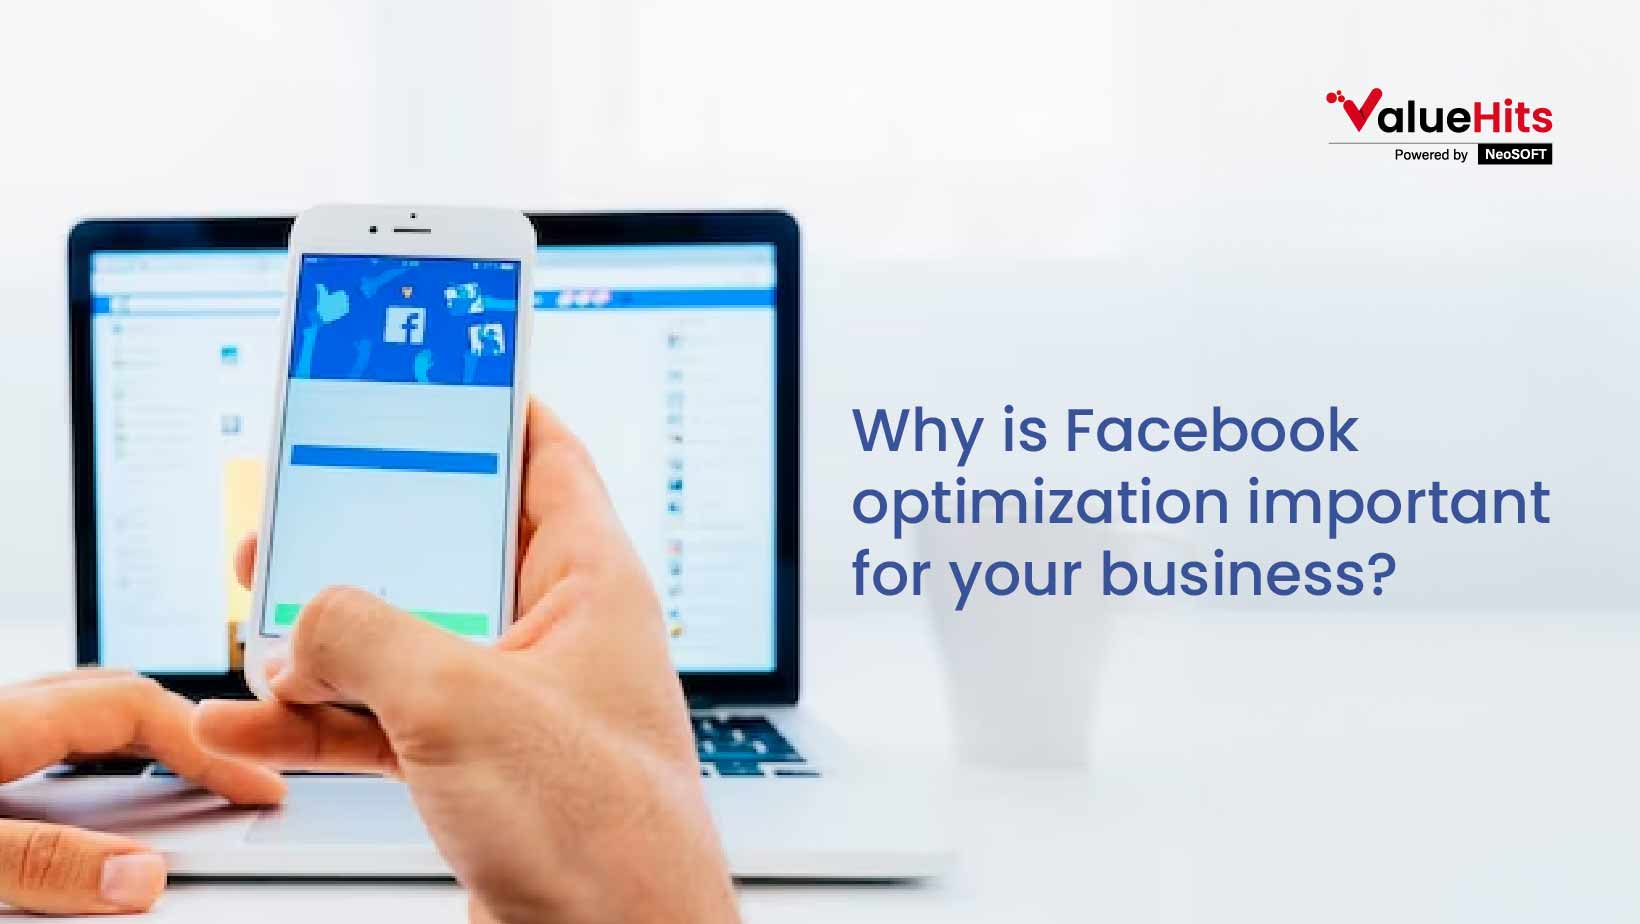 Why is Facebook optimization important for your business